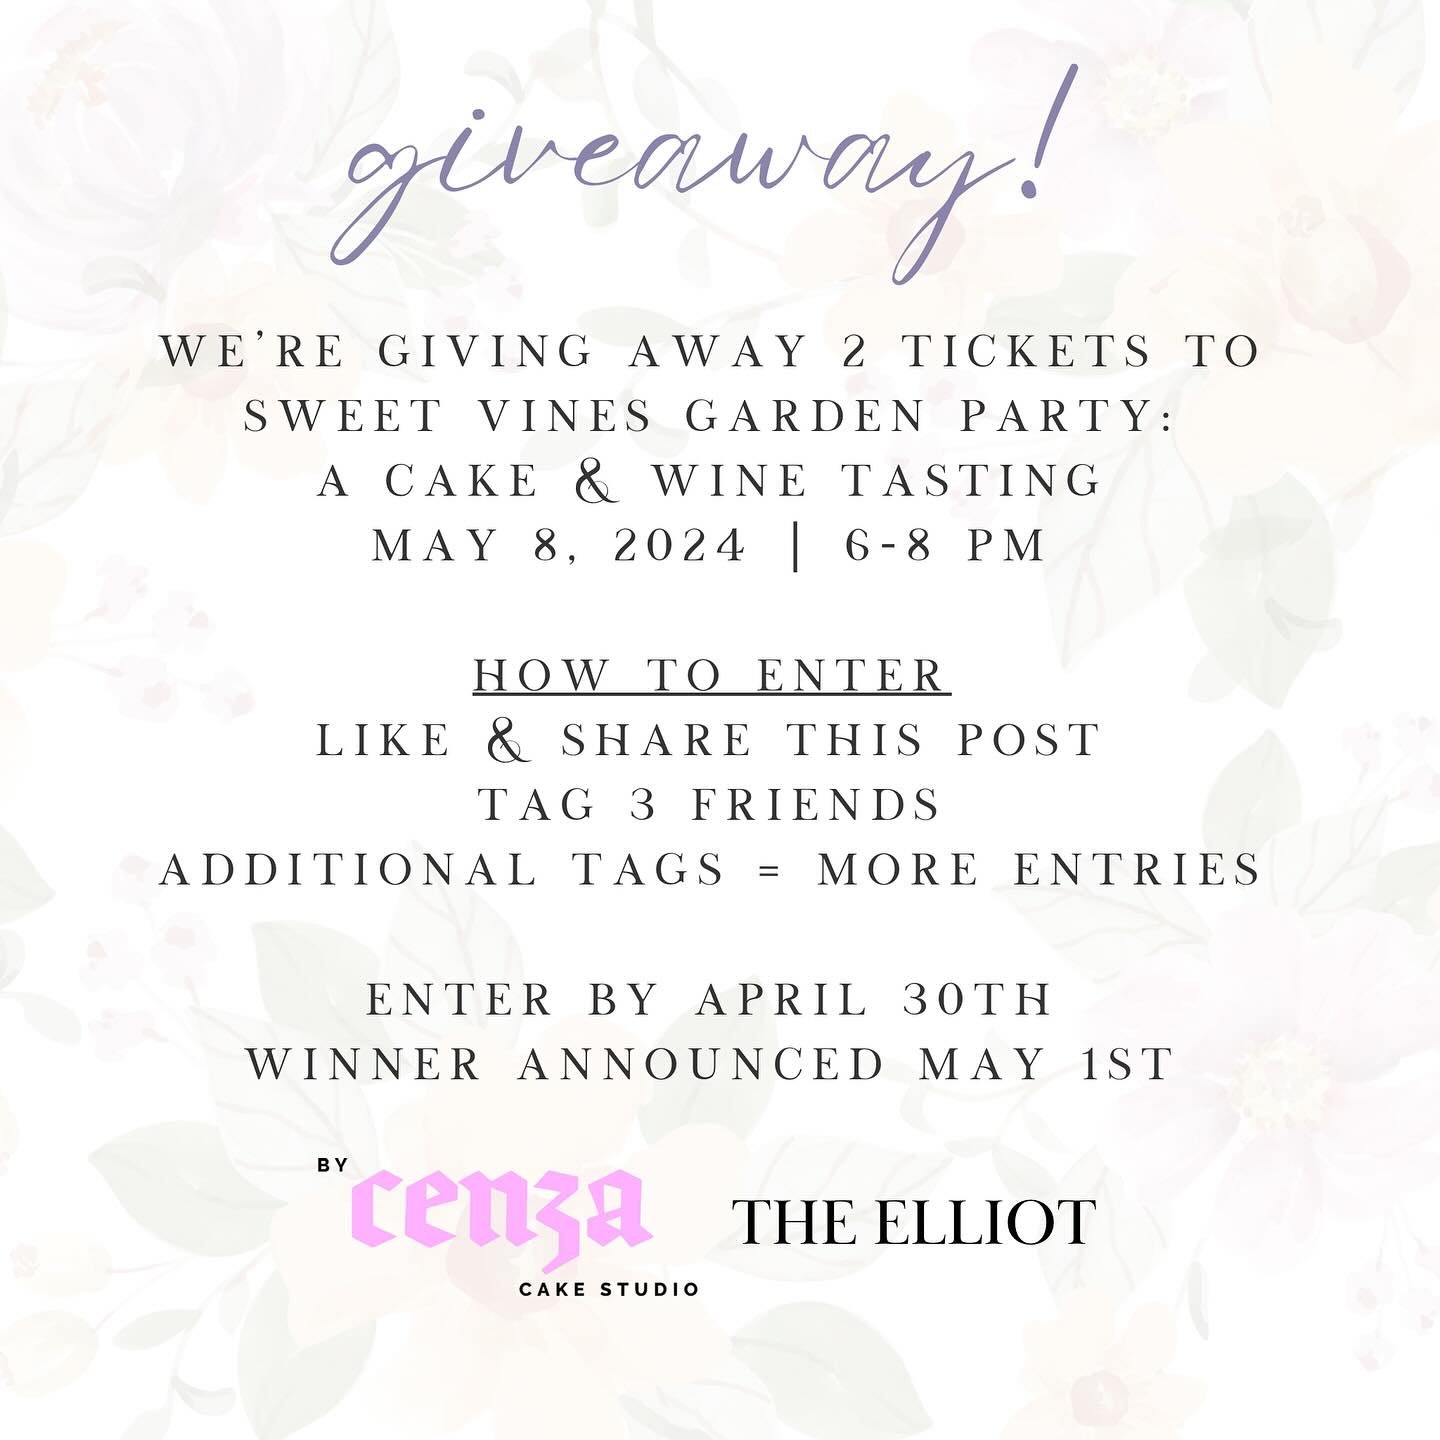 🎂 GIVEAWAY 🍷 

We&rsquo;re giving away two tickets to our cake &amp; wine tasting on Wednesday, May 8th!

Your ticket includes:
✨ 5 cake flavors provided by @bycenza 
✨ Unlimited wine &amp; suggested pairings
✨ Tea sandwiches &amp; snacks
✨ Enterta